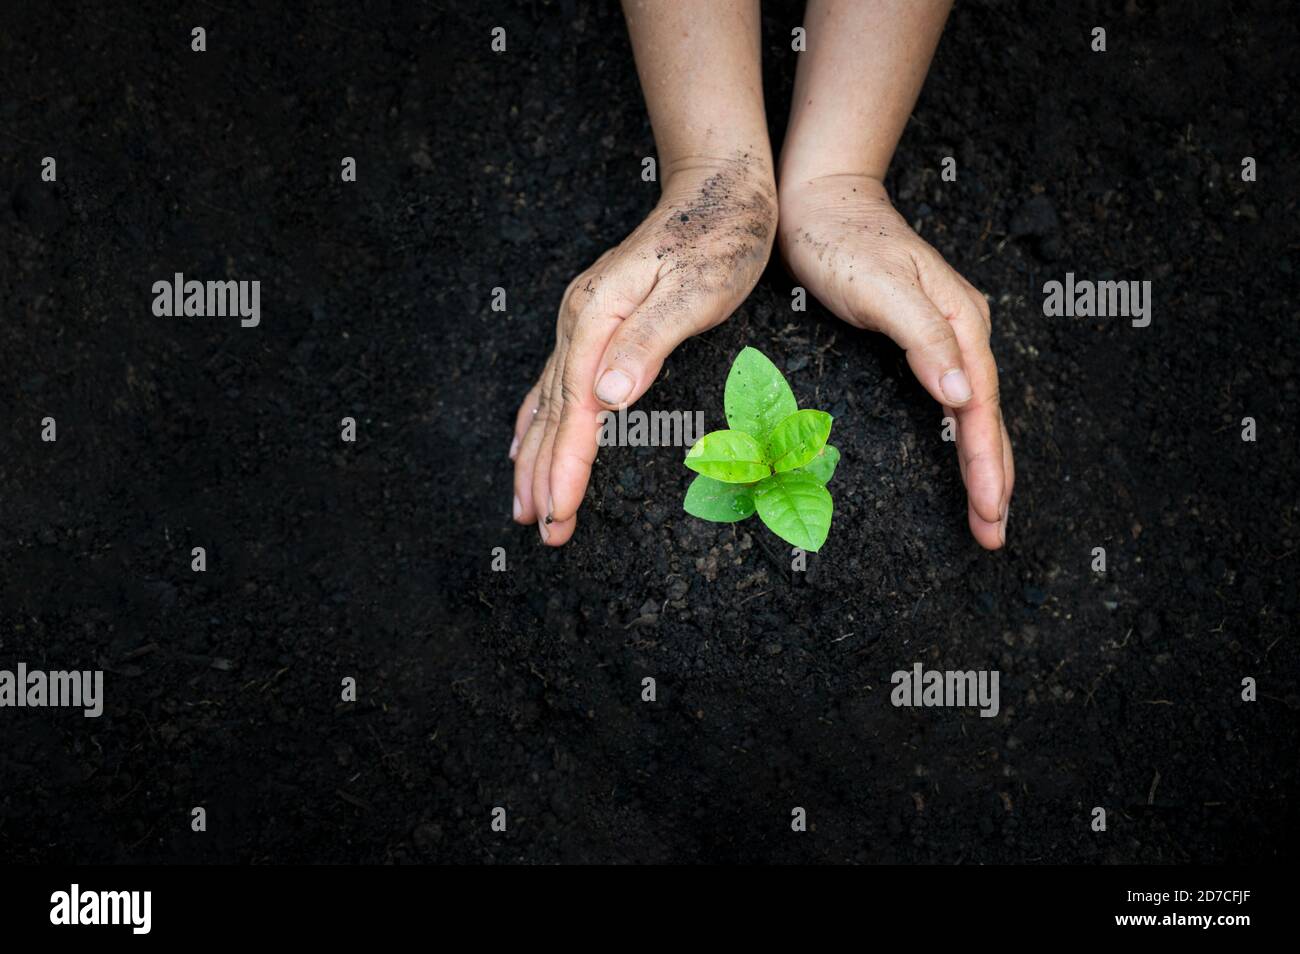 hand Watering plants tree mountain green Background Female hand holding tree on nature field grass Forest conservation concept Stock Photo